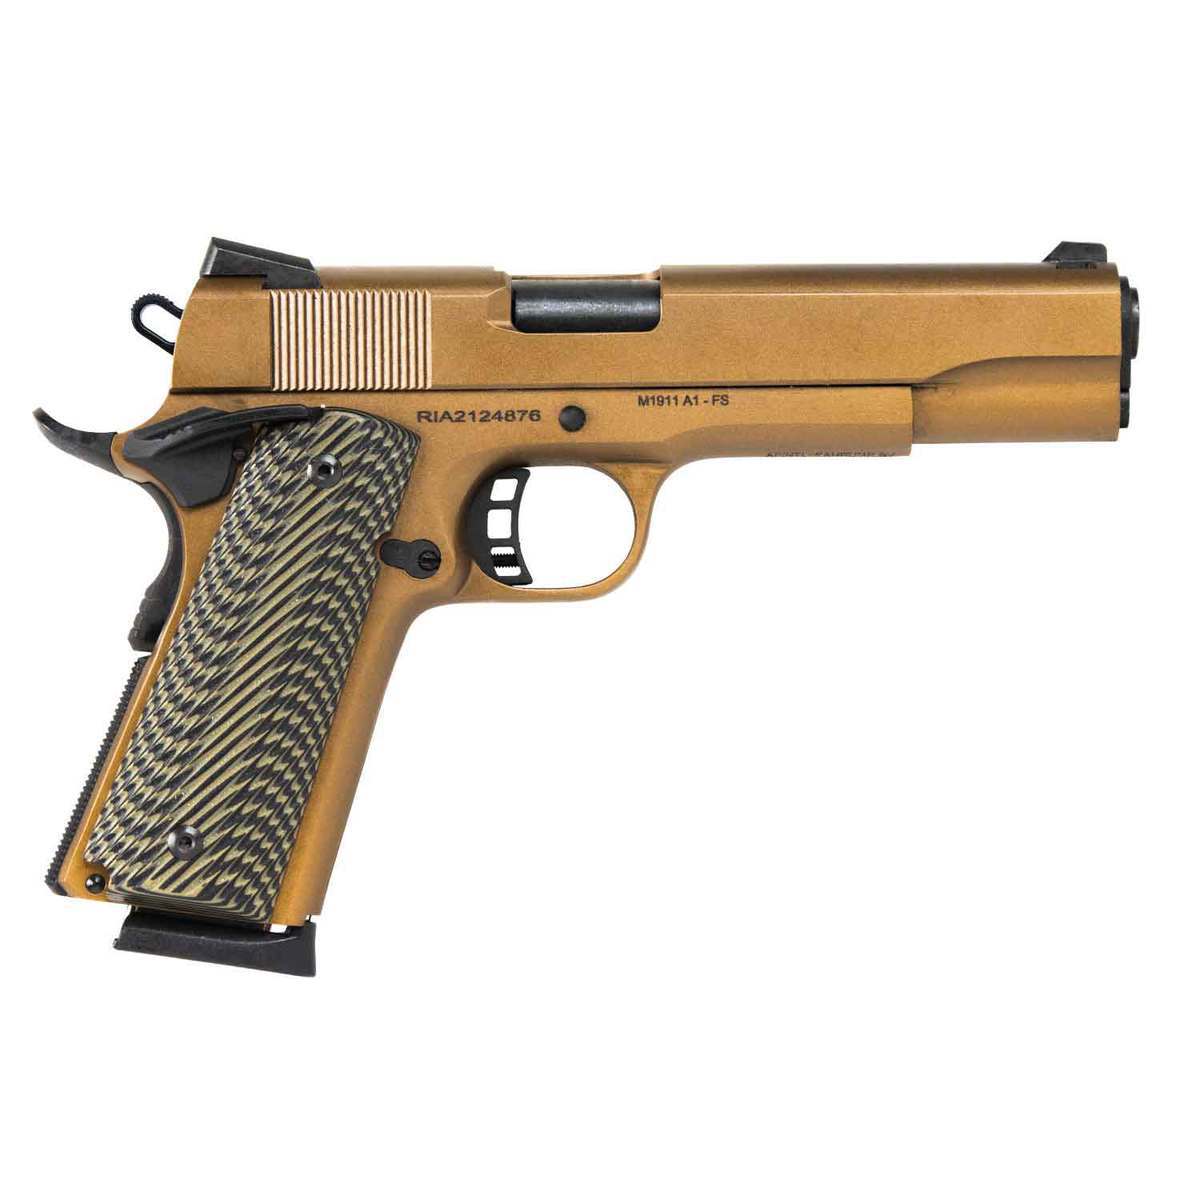 Rock Island Armory M1911 A1 Fs Tactical 45 Auto Acp 5in Burnt Bronzegreen Pistol 81 Rounds 5785